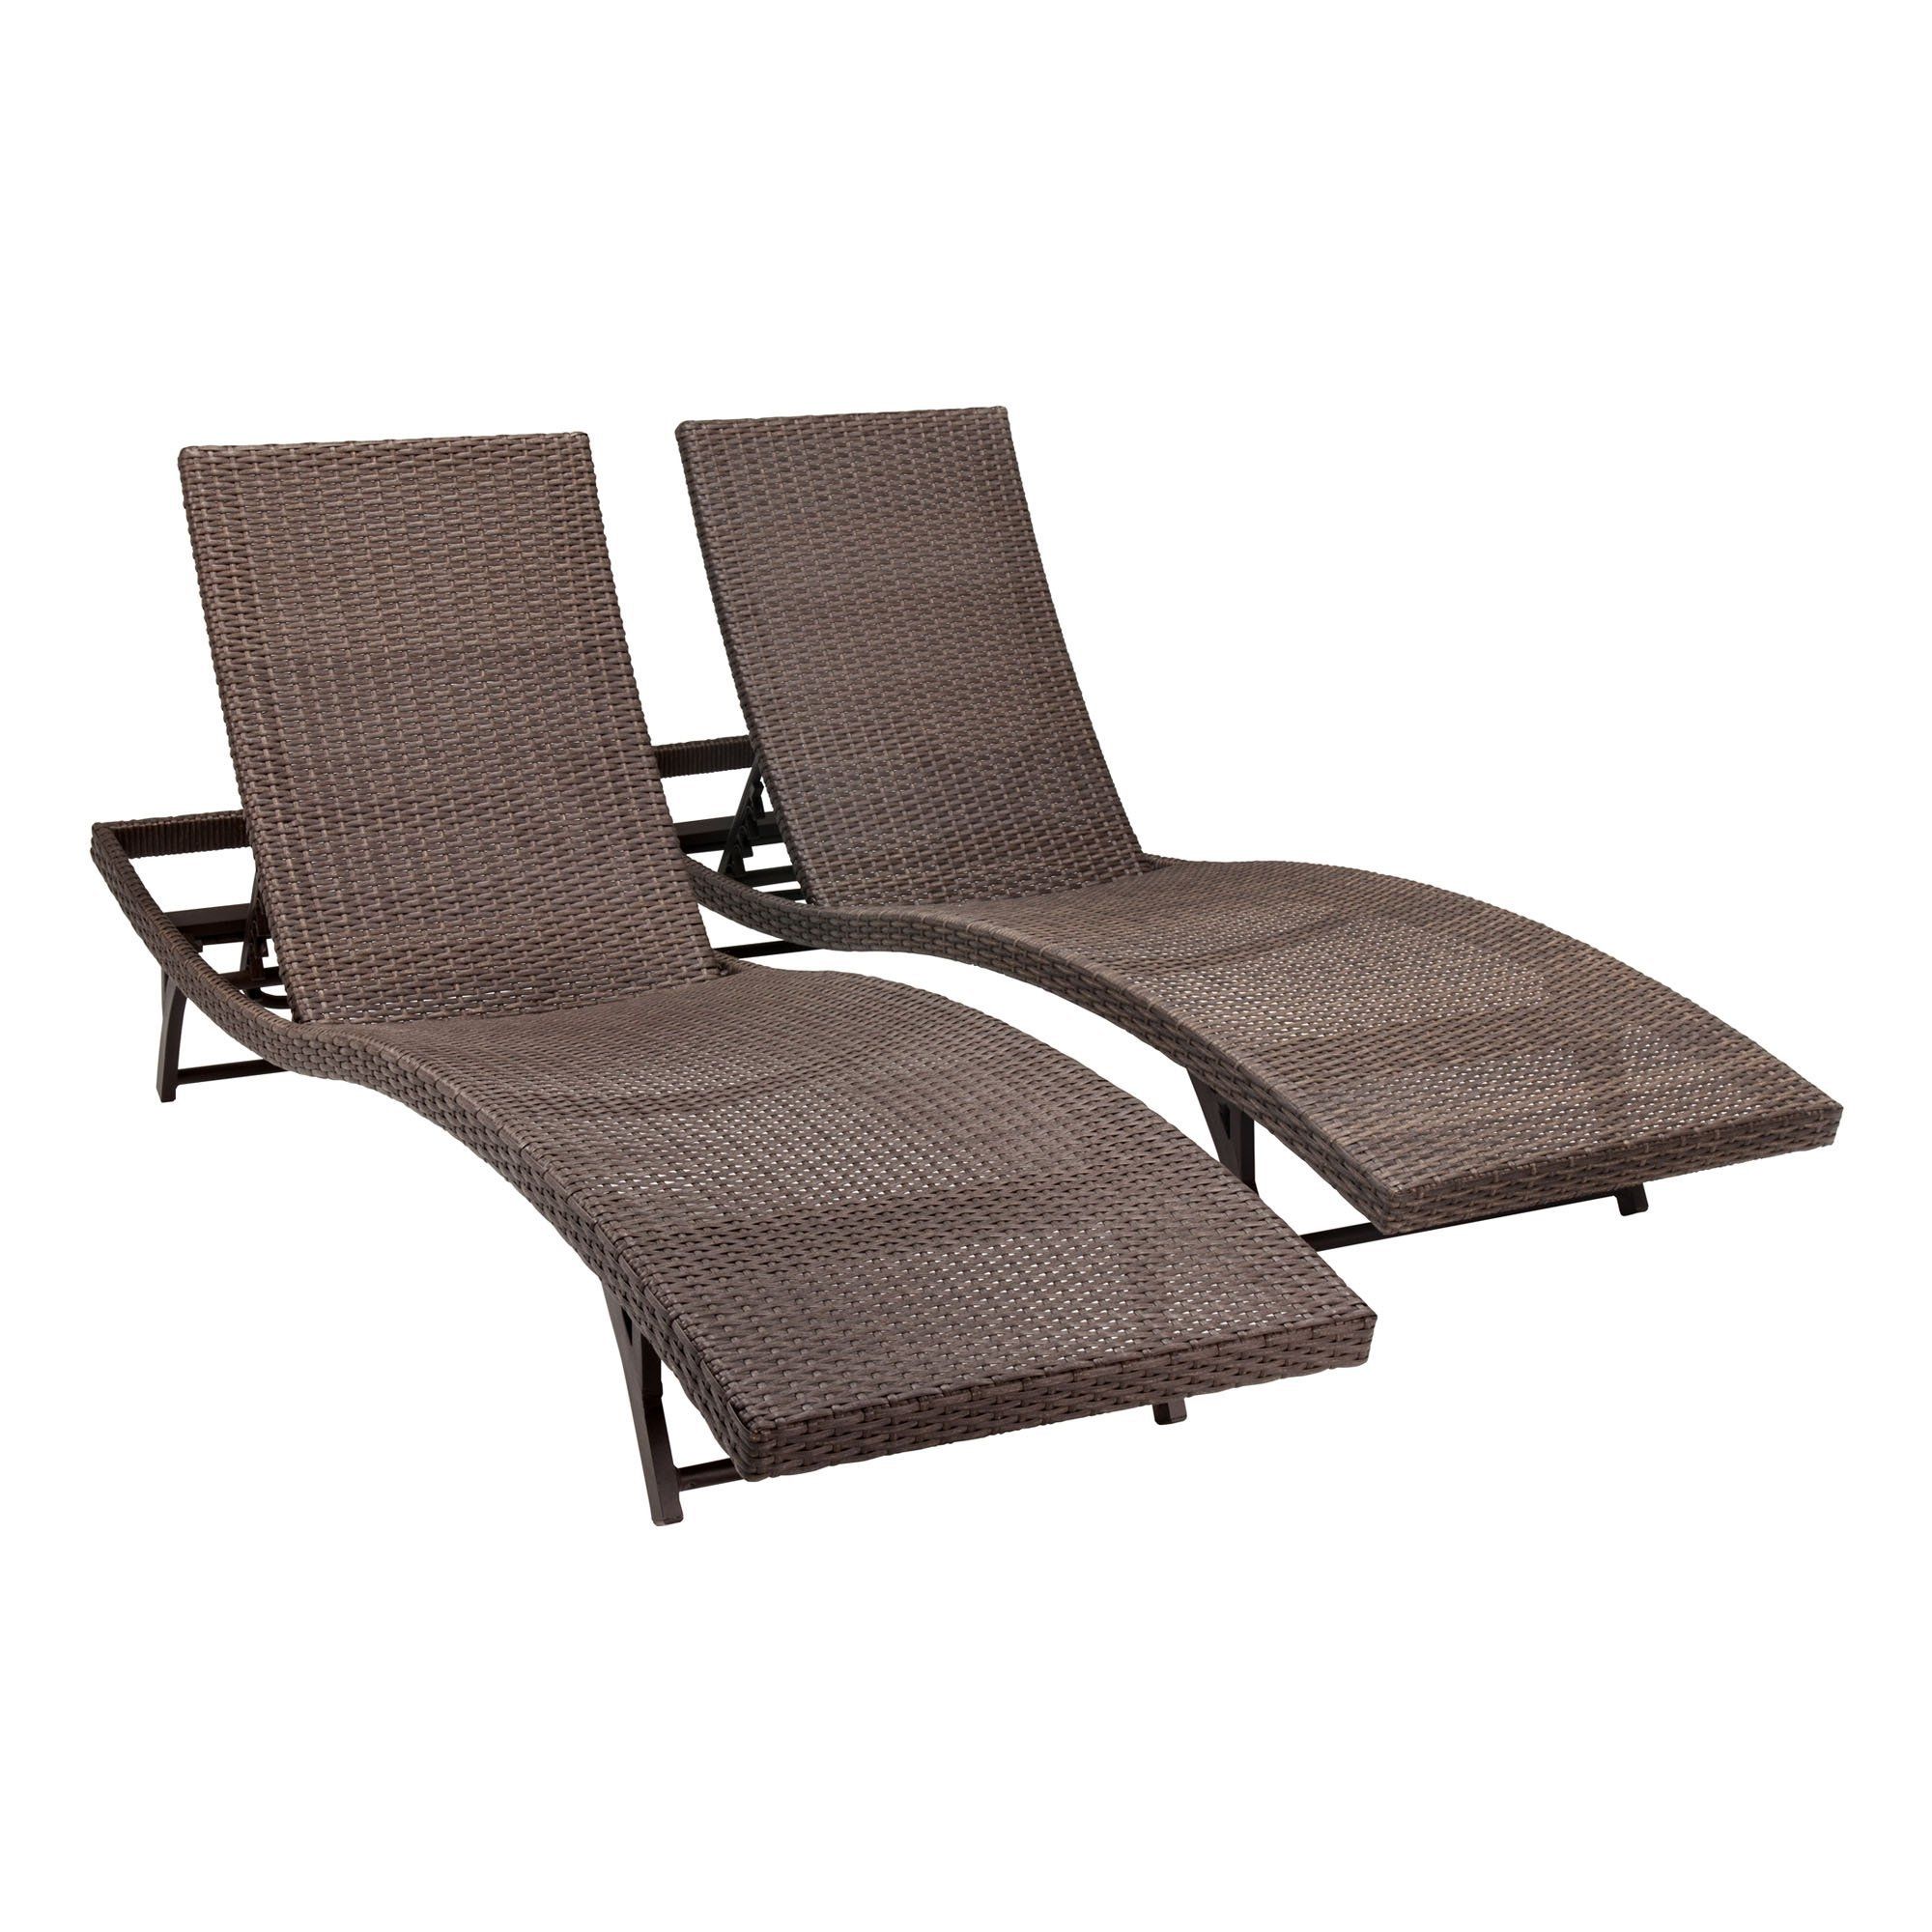 Vinyl Outdoor Chaise Lounge Chairs Inside Preferred Outdoor : Cheap Lounge Chairs Vinyl Strap Chaise Lounge Home Depot (View 9 of 15)